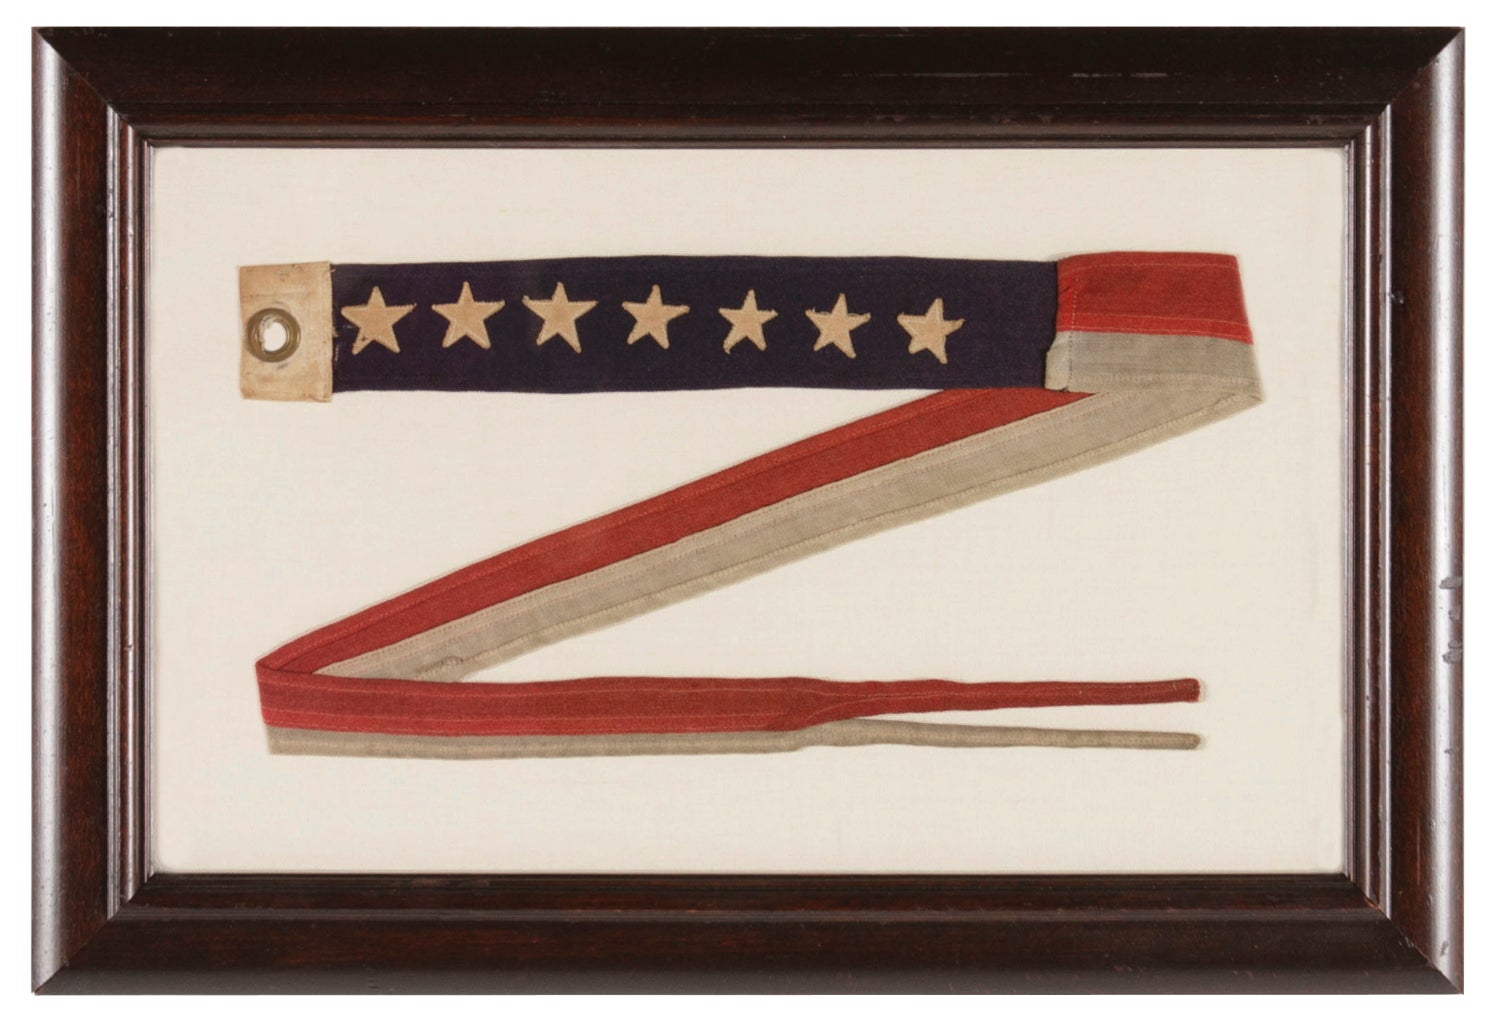 U.S. Navy Commissioning Pennant with 7 Stars WWI-WWII Era (1917-1945)